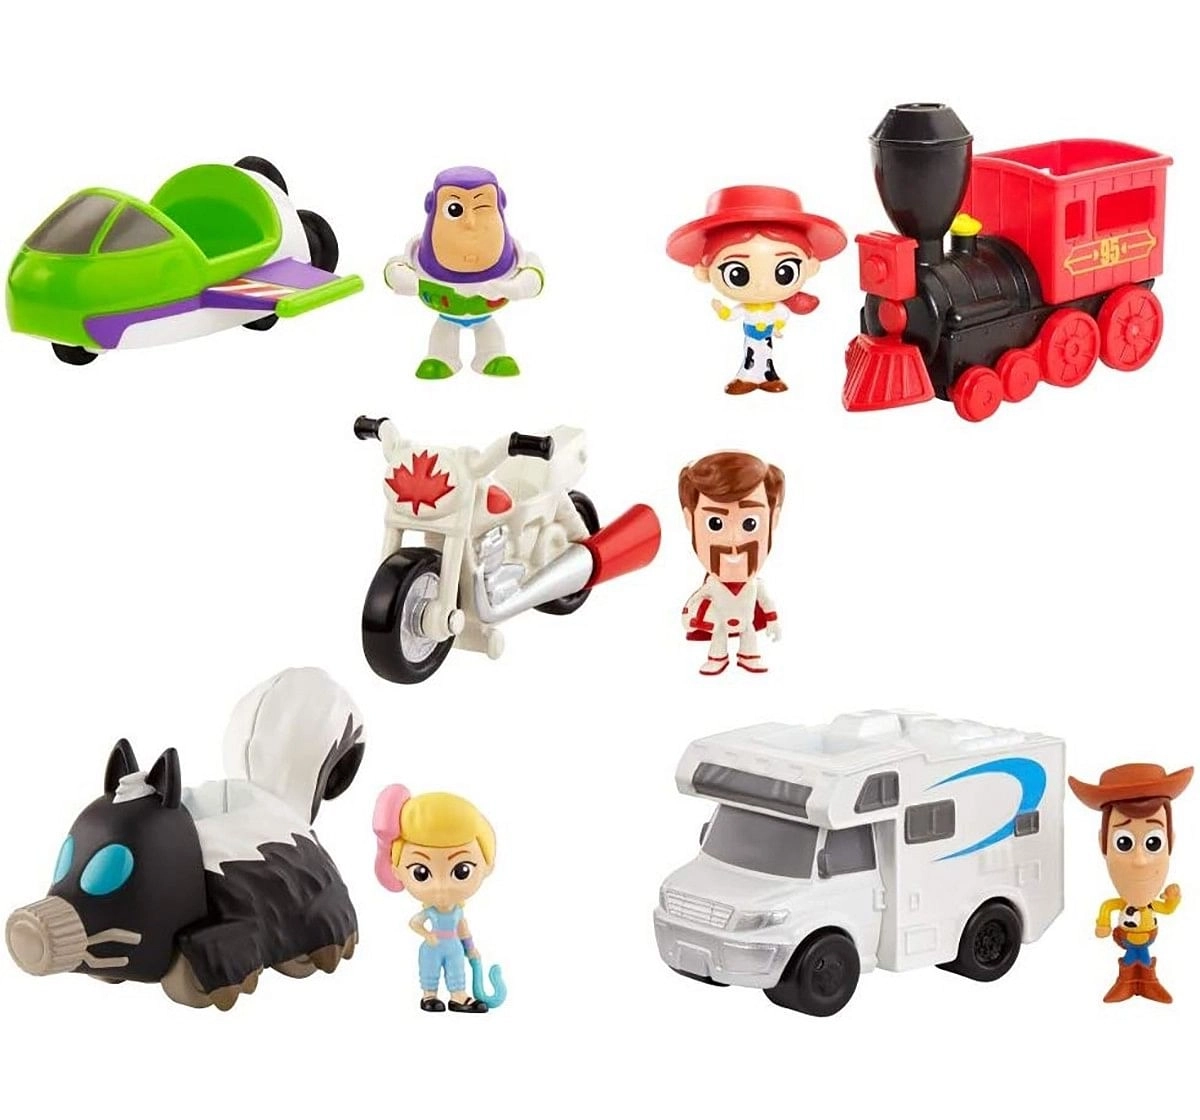 Disney Toy Story Mini Figure And Vehicle Set Action Figures for Kids age 3Y+, Assorted